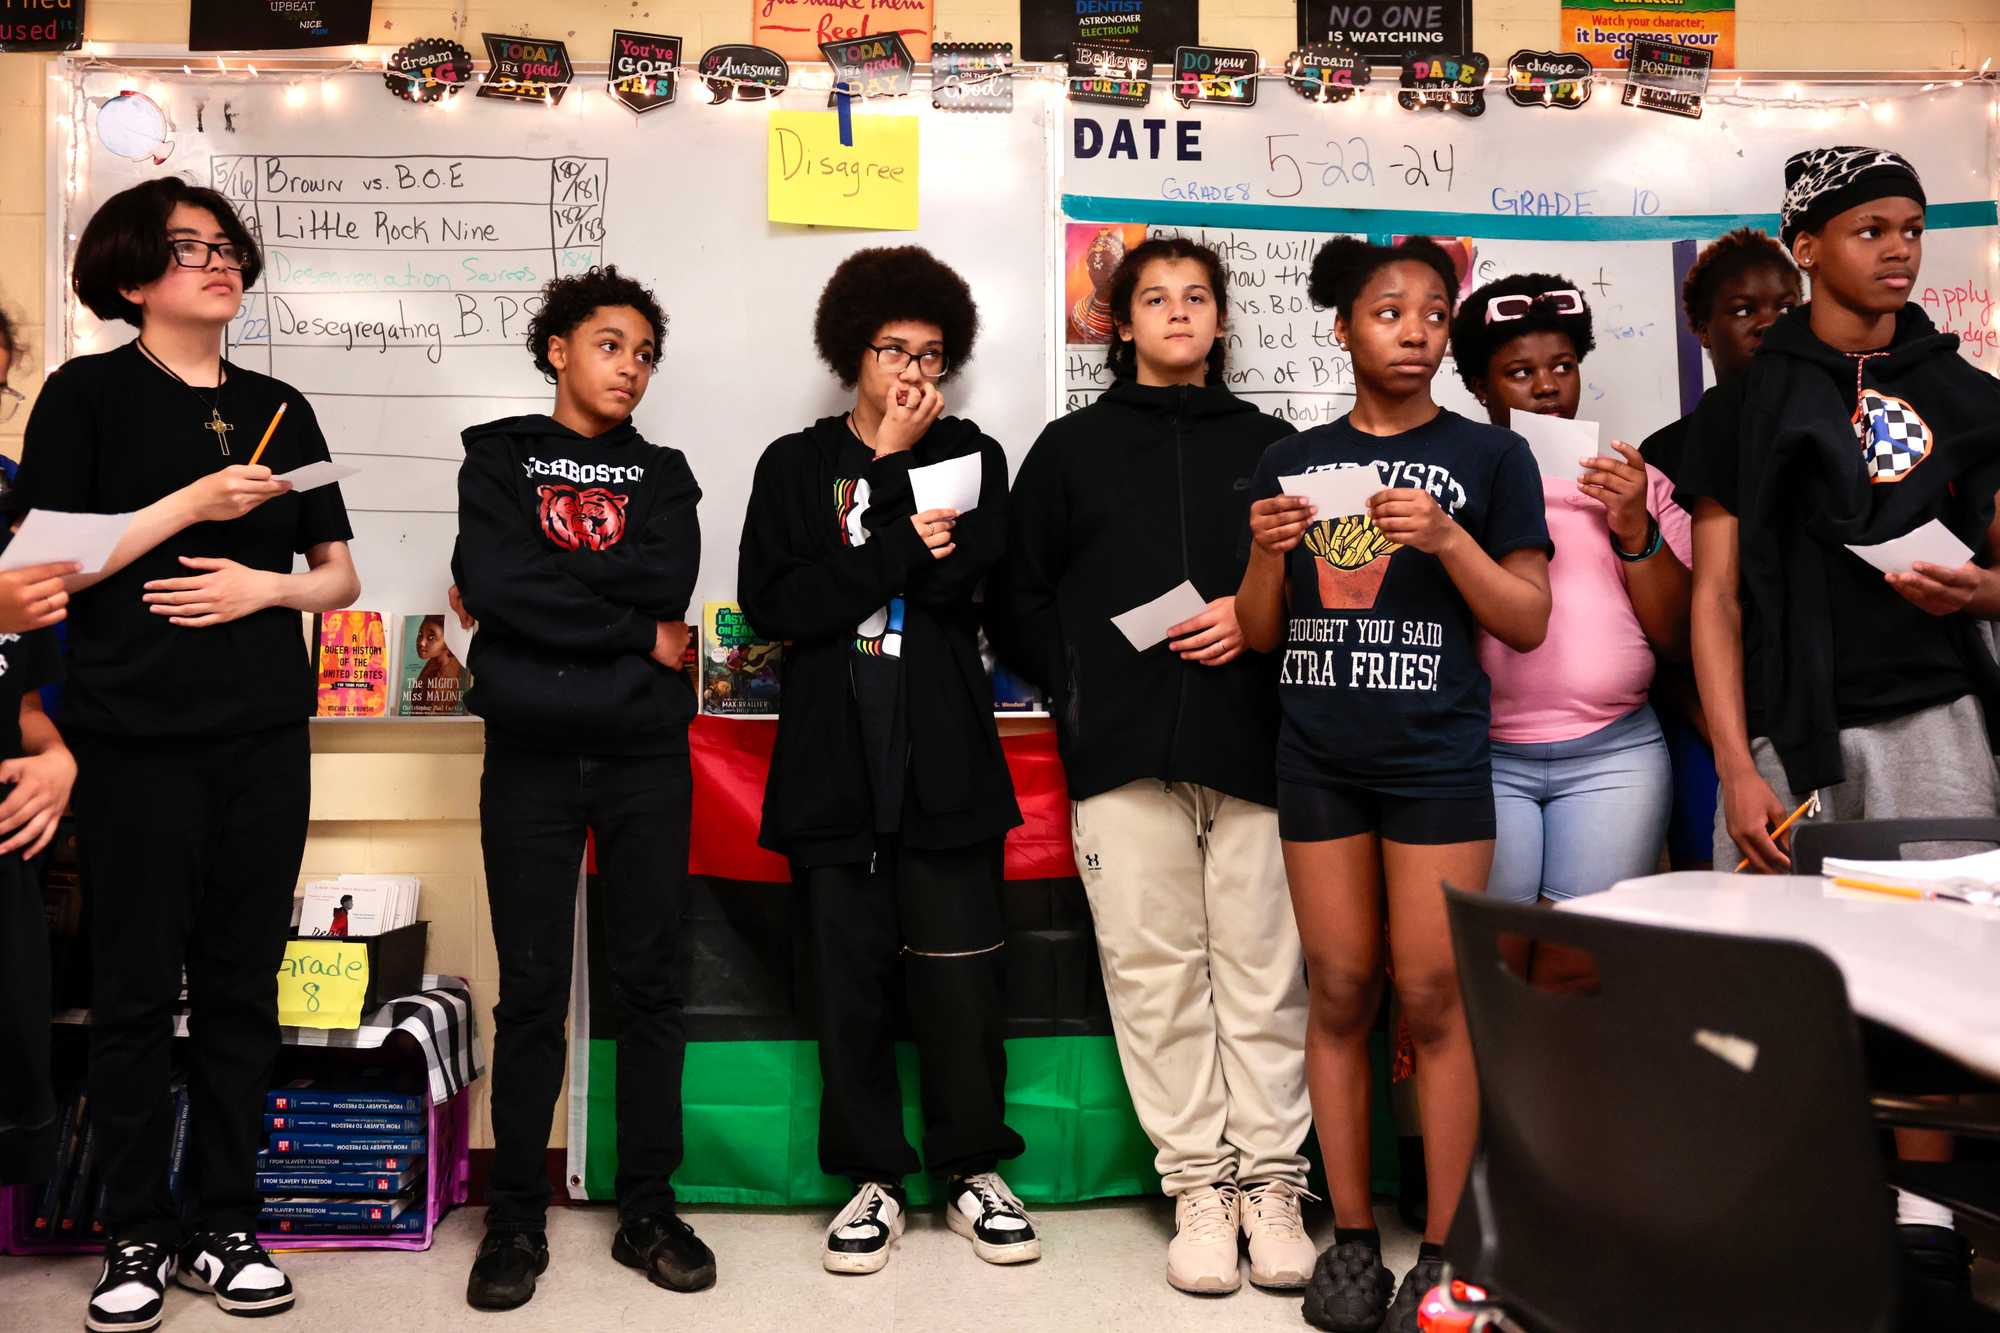 Students discussed statements about racial equity during Tanisha Milton’s eighth-grade civics class at TechBoston Academy.